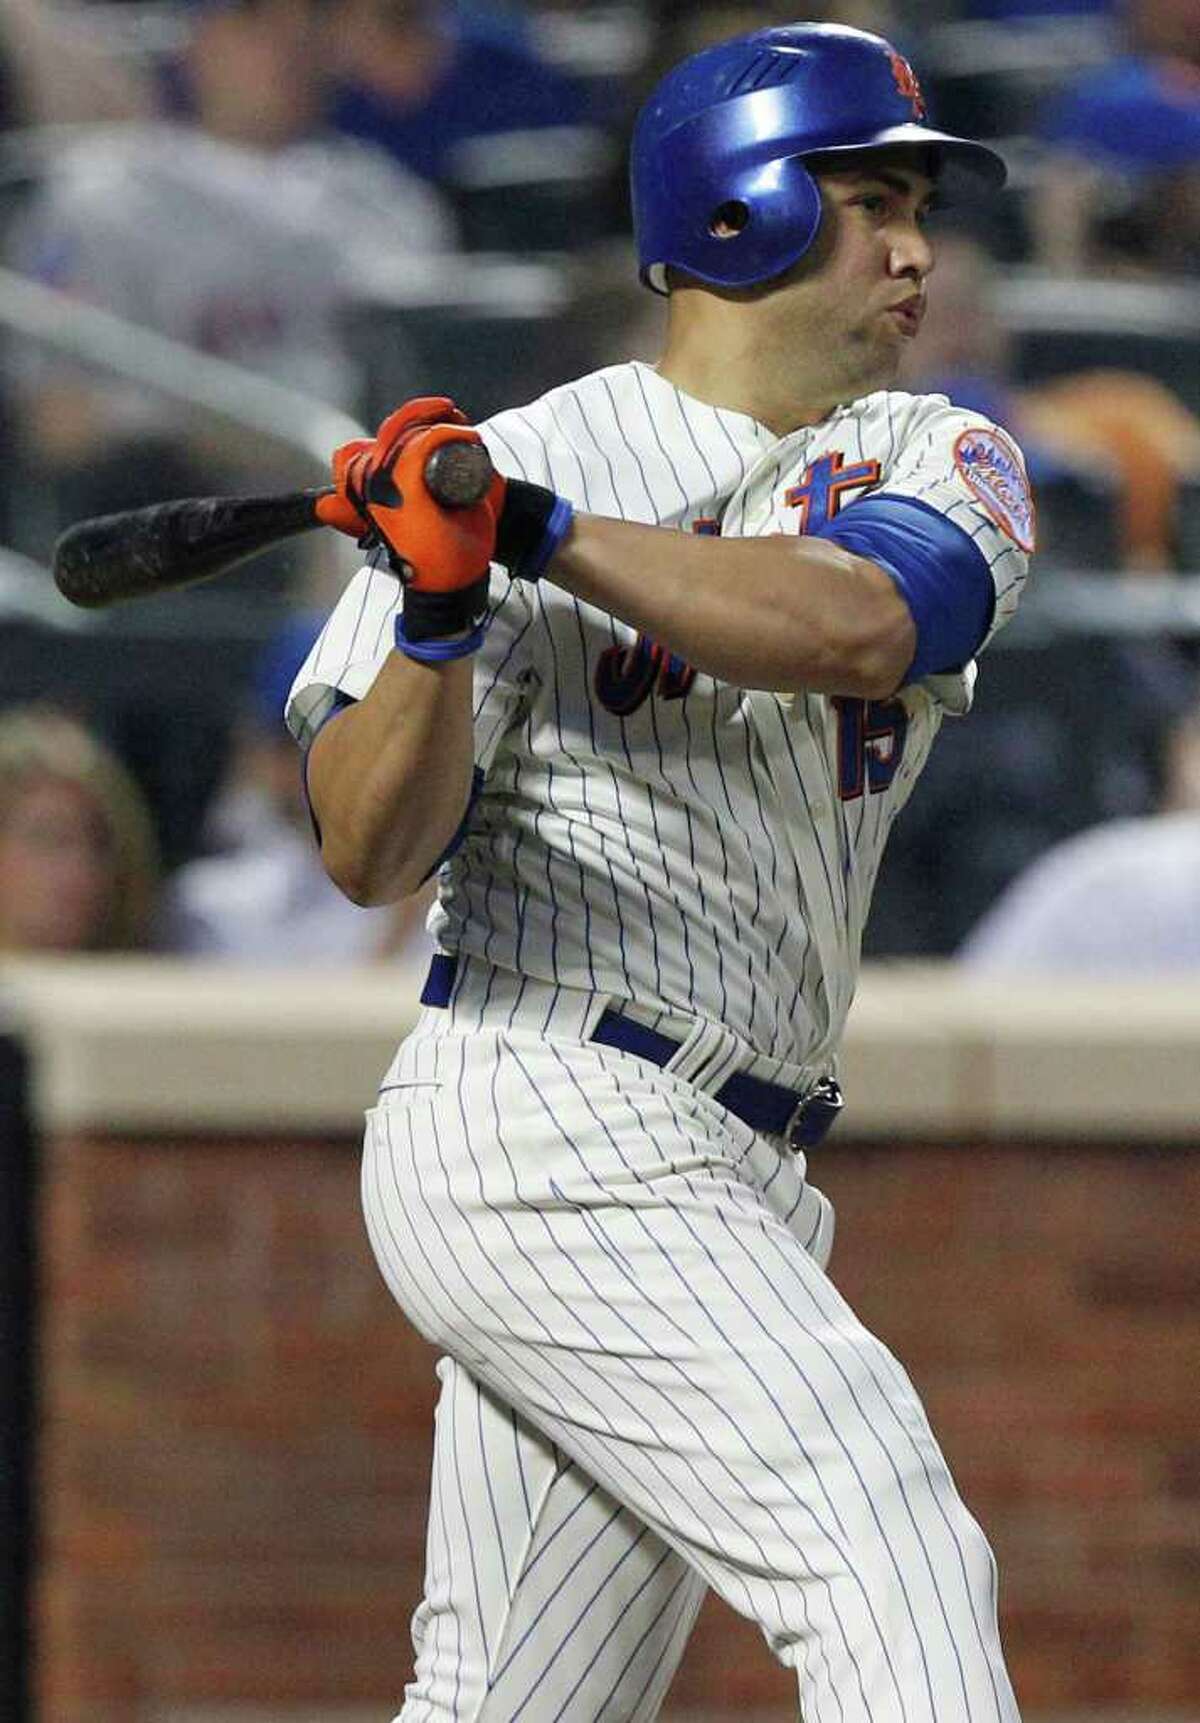 New York Mets' Carlos Beltran follows through on a two run home run during the fifth inning of an interleague baseball game against the Los Angeles Angels Saturday, June 18, 2011, at Citi Field in New York. (AP Photo/Frank Franklin II)